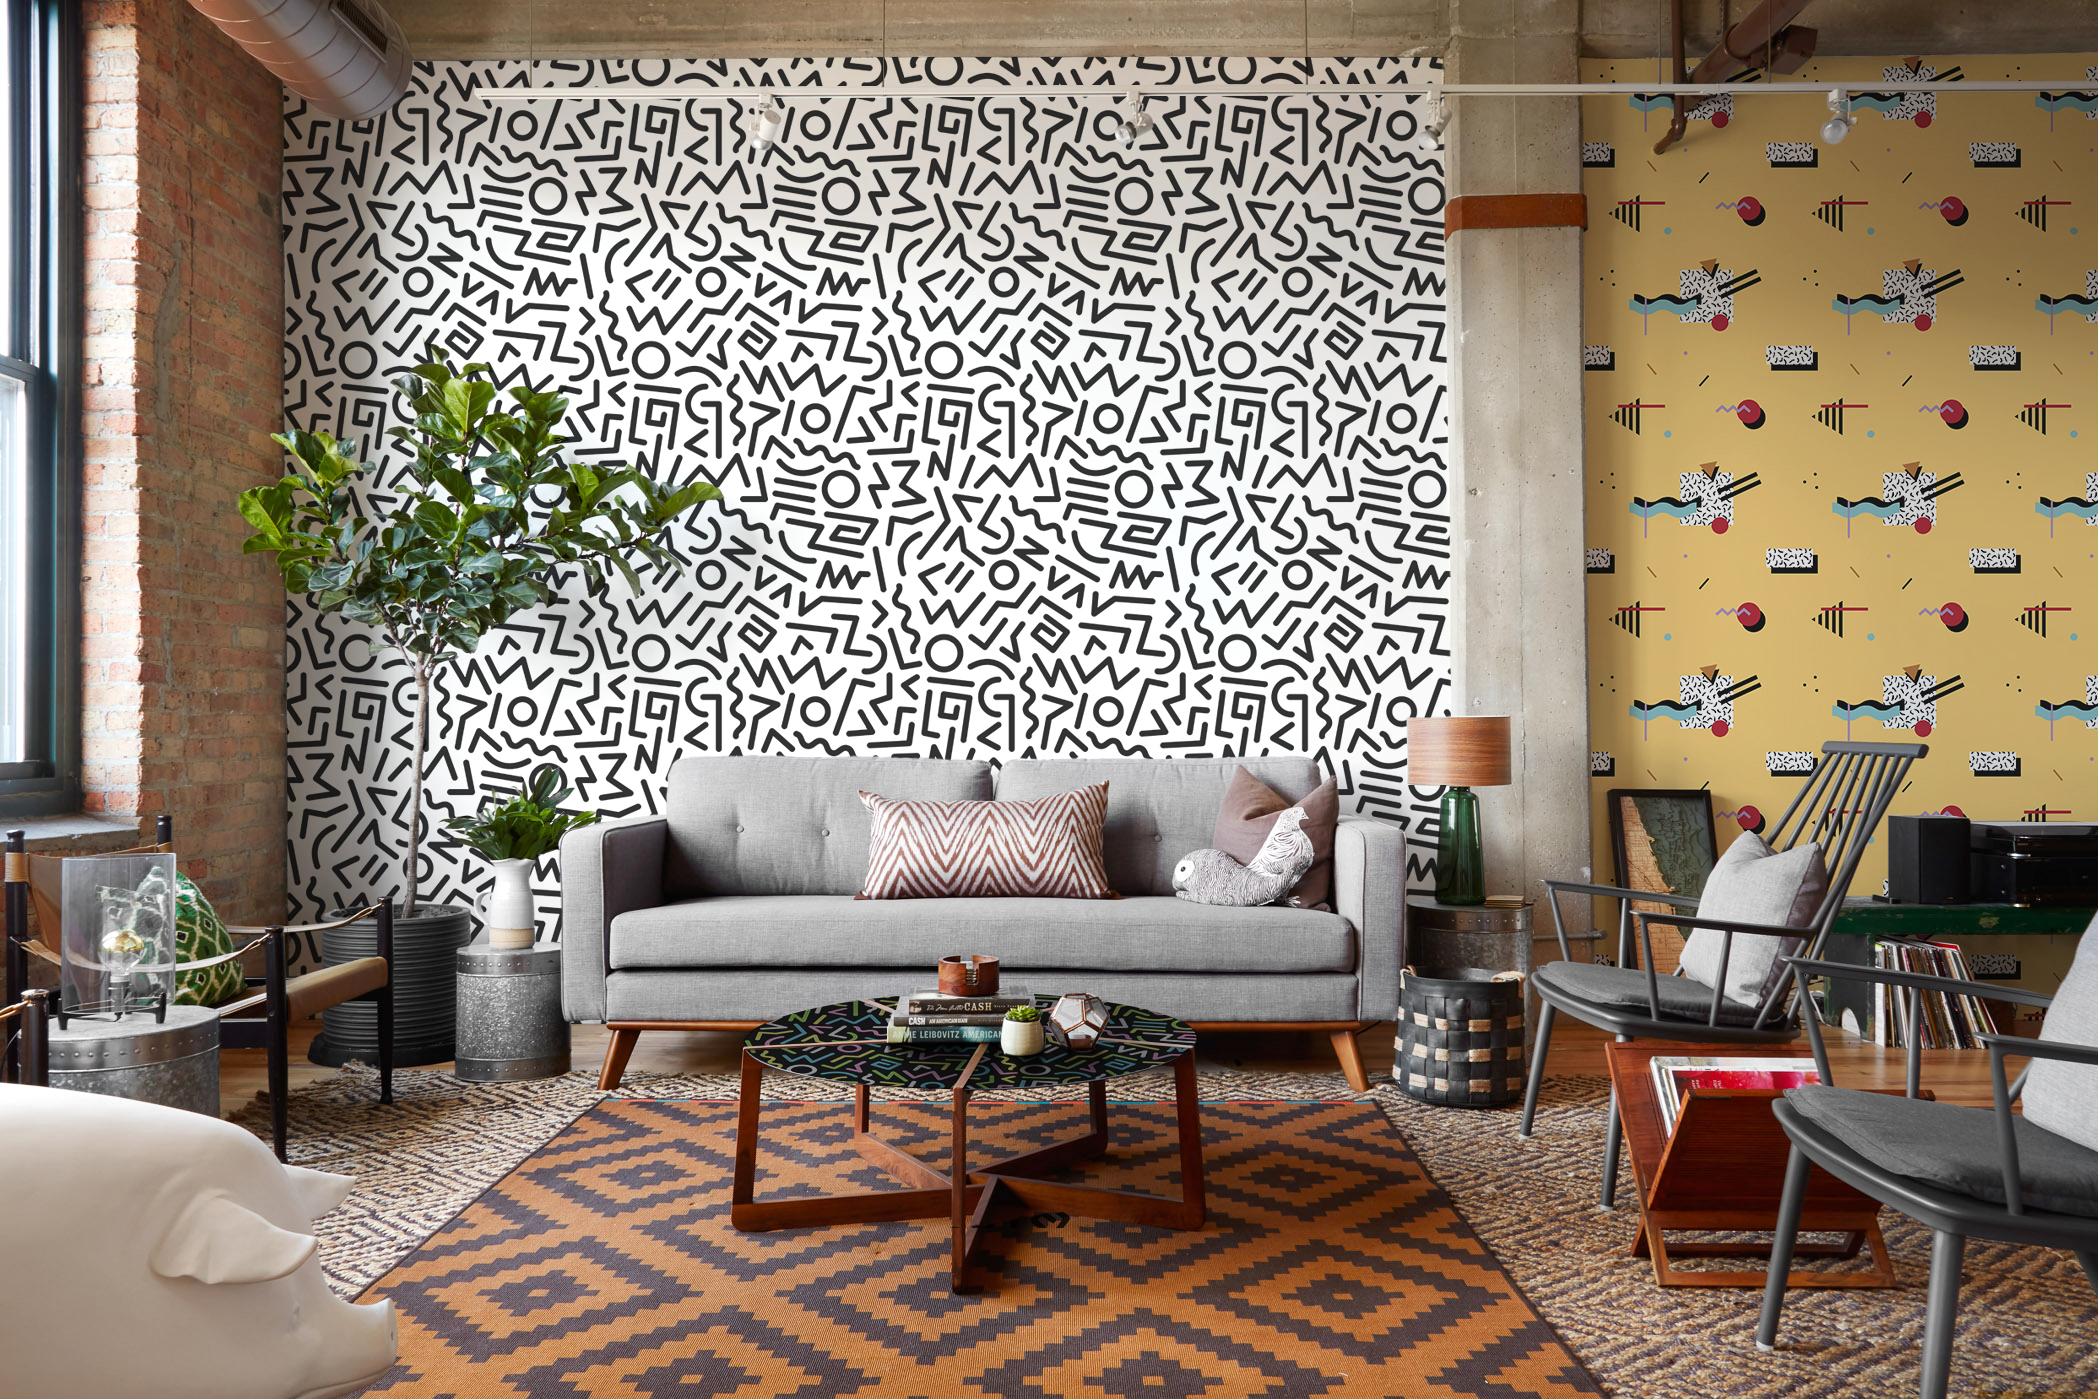 In the labyrinth • Living room - Contemporary - Abstraction - Black and white - Wall Murals